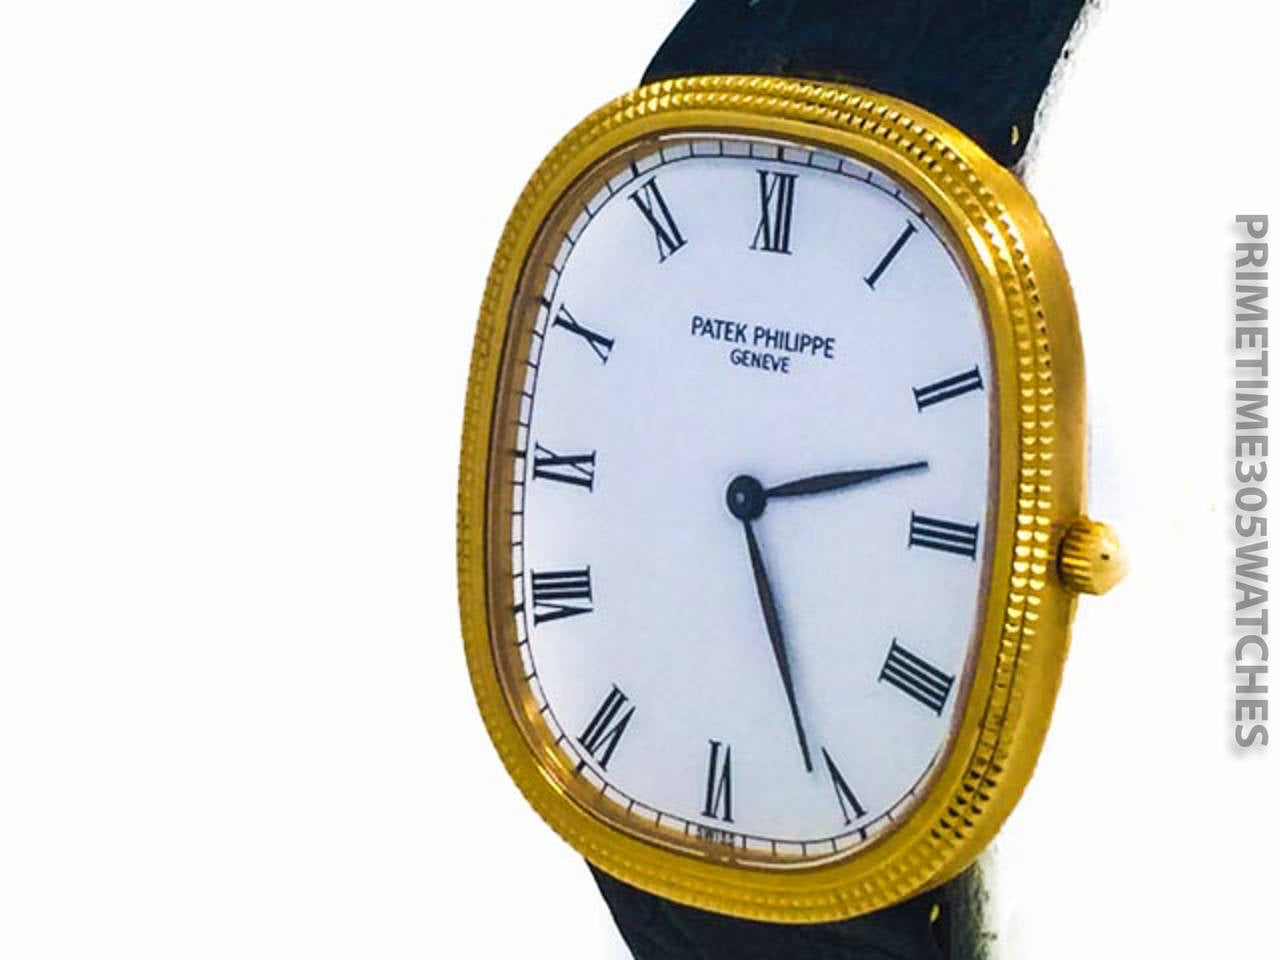 Rare Mens Patek Philippe Ref 3958 Jumbo Automatic Ellipse W/ Hobnail Bezel in 18k Yellow Gold. The Watch is in Excellent Condition and Keeping Perfect Time,Movement is Powered by Automatic Winding. The Watch is on a Patek Band & Generic Plated